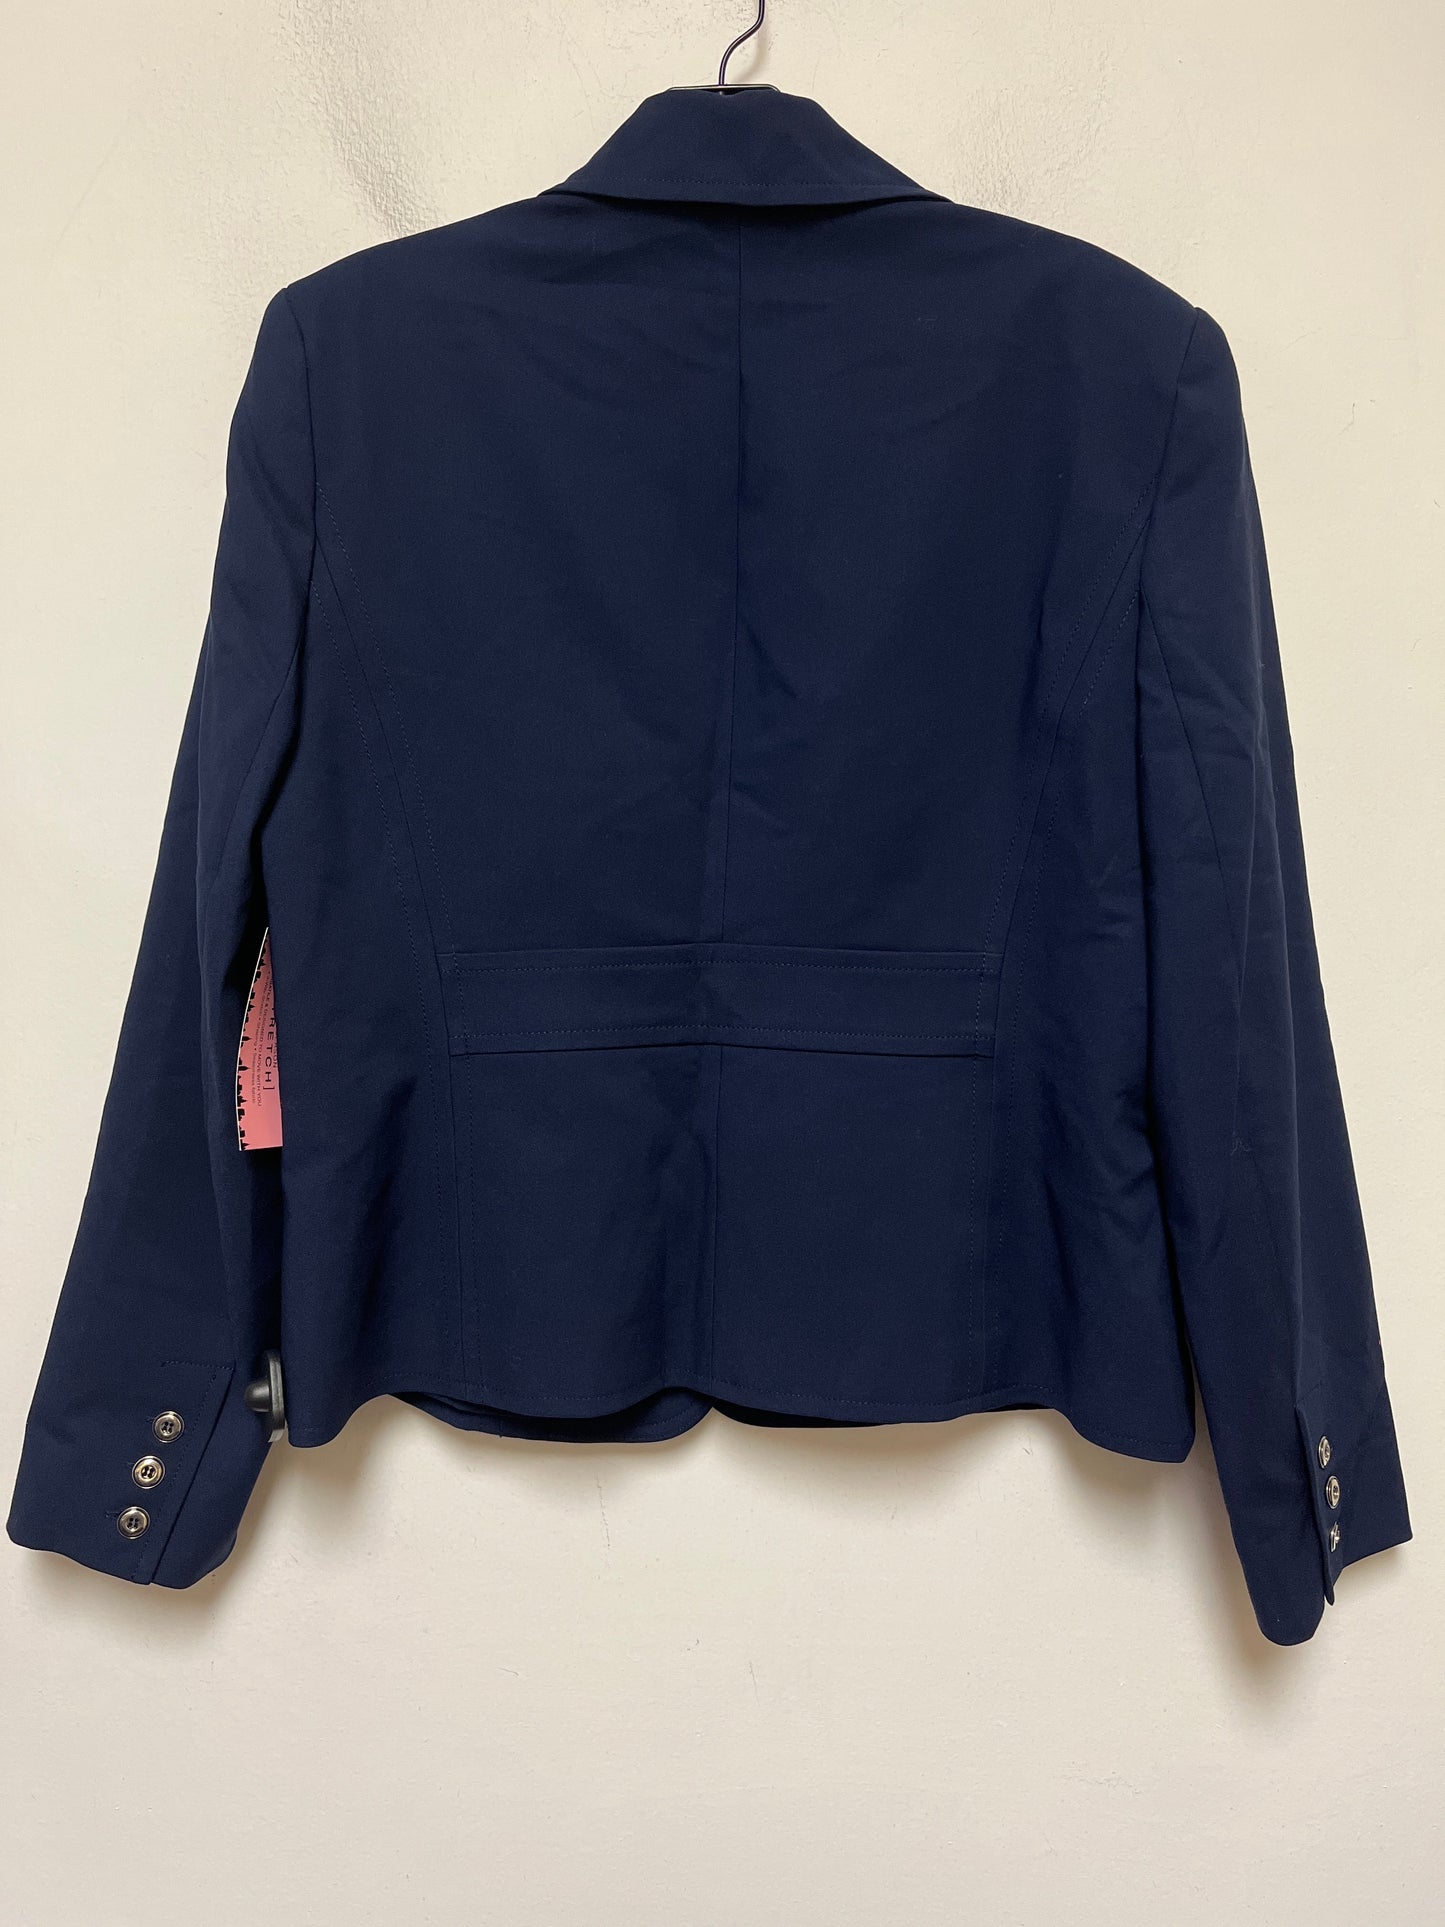 Navy Blazer New York And Co, Size L